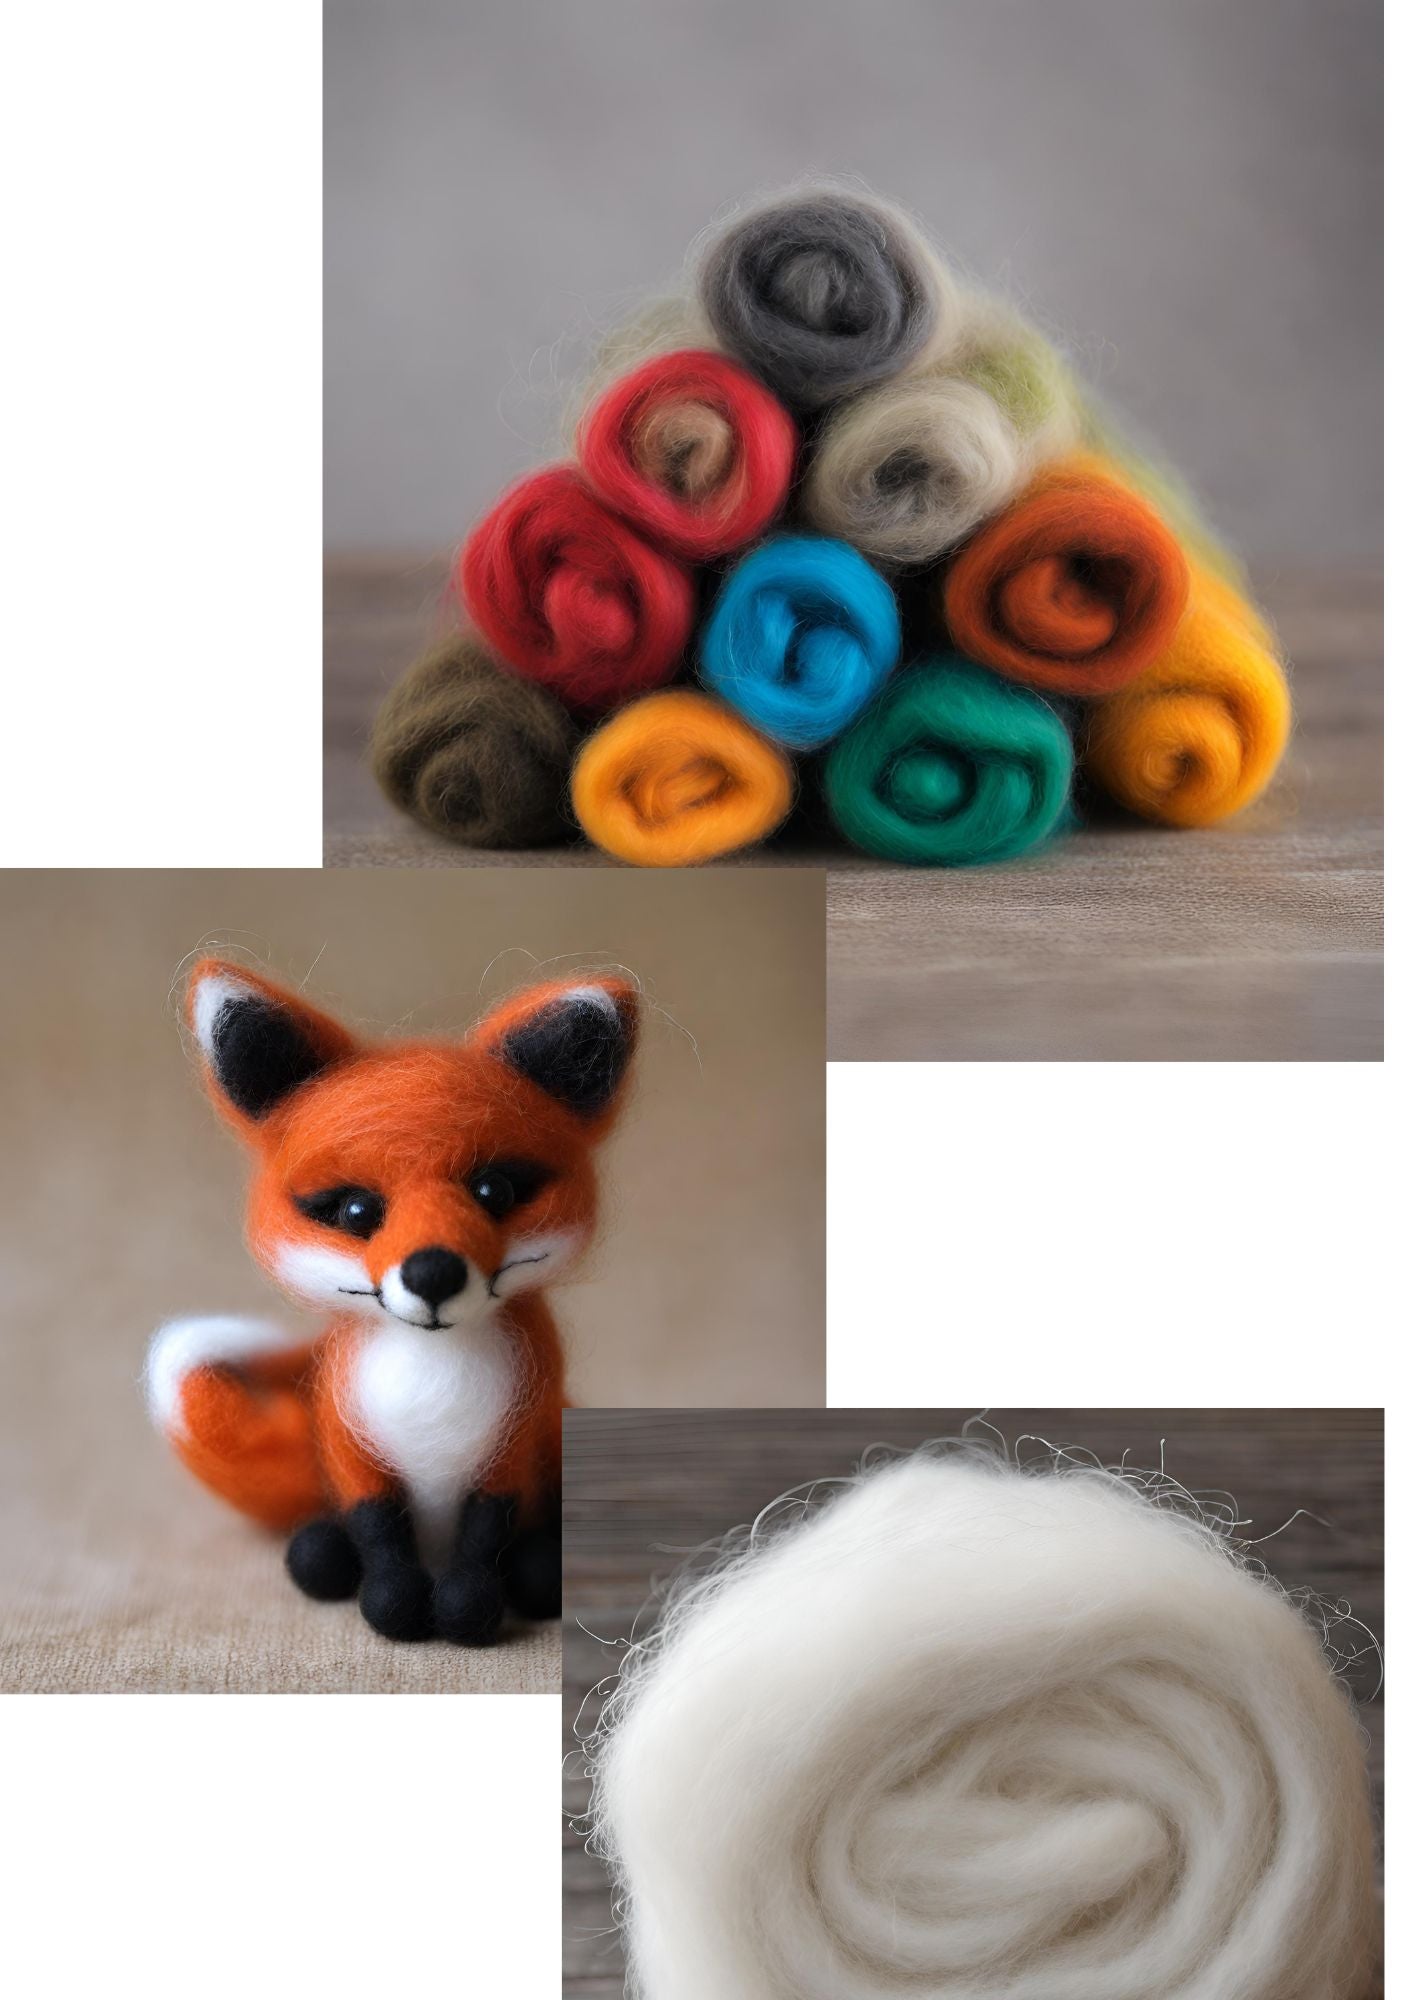 Felting Wool types and use in Needle Felting Sculptures